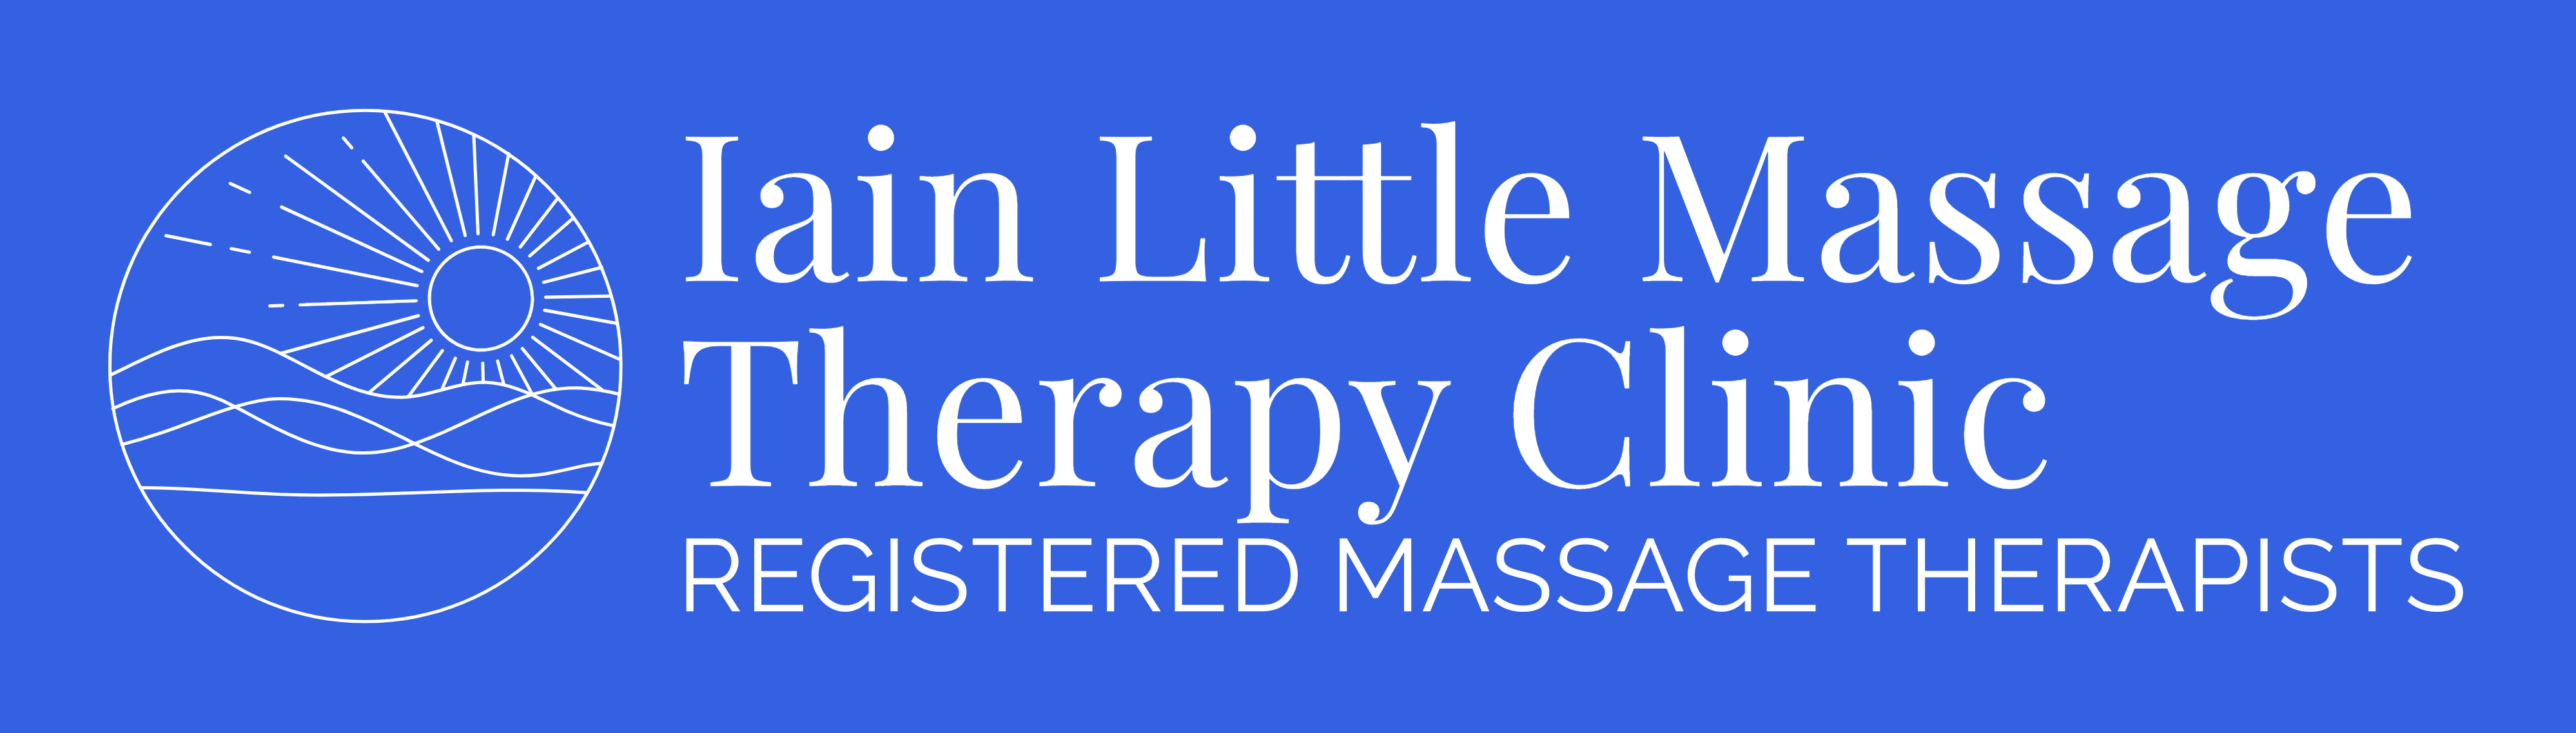 The Iain Little Massage Therapy Clinic